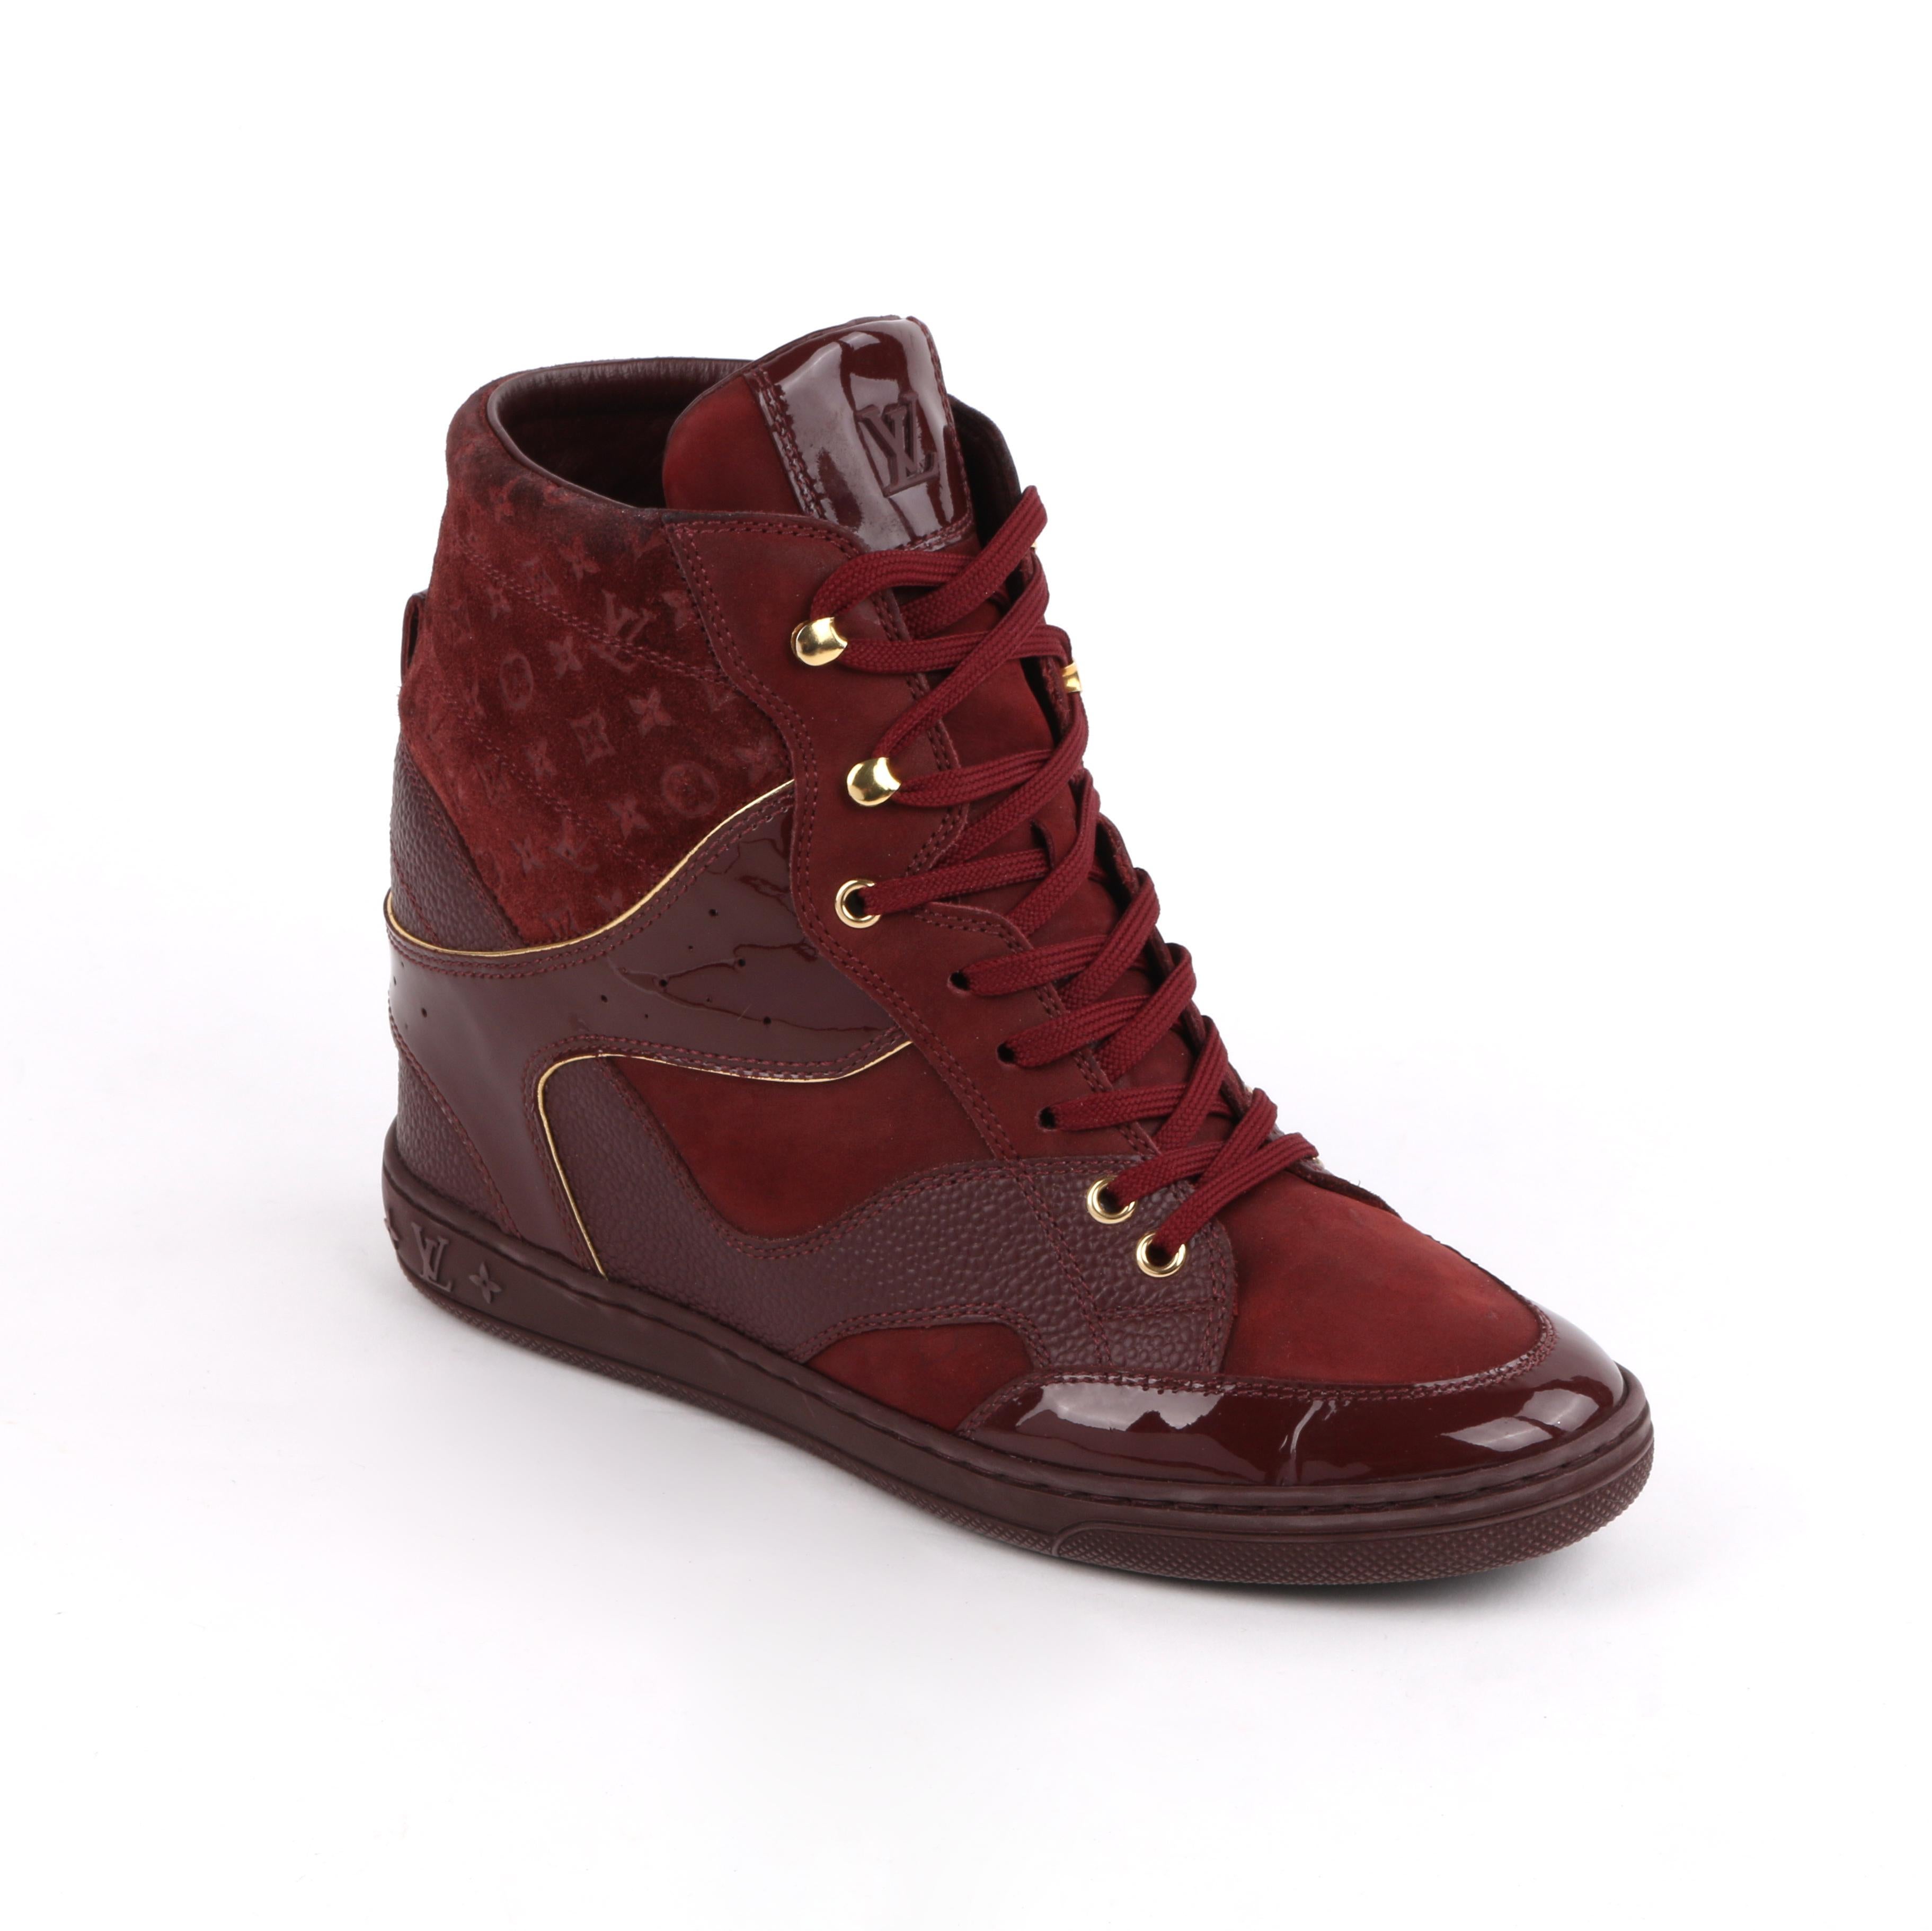 LOUIS VUITTON c.2014 Burgundy Bordeaux Monogram Suede Cliff Top Wedge Sneakers
 
Estimated Retail Price: $855.00
 
Brand / Manufacturer: Louis Vuitton 
Style: Wedge Sneakers
Color(s): Burgundy and gold 
Unmarked Materials: Rubber (sole); leather